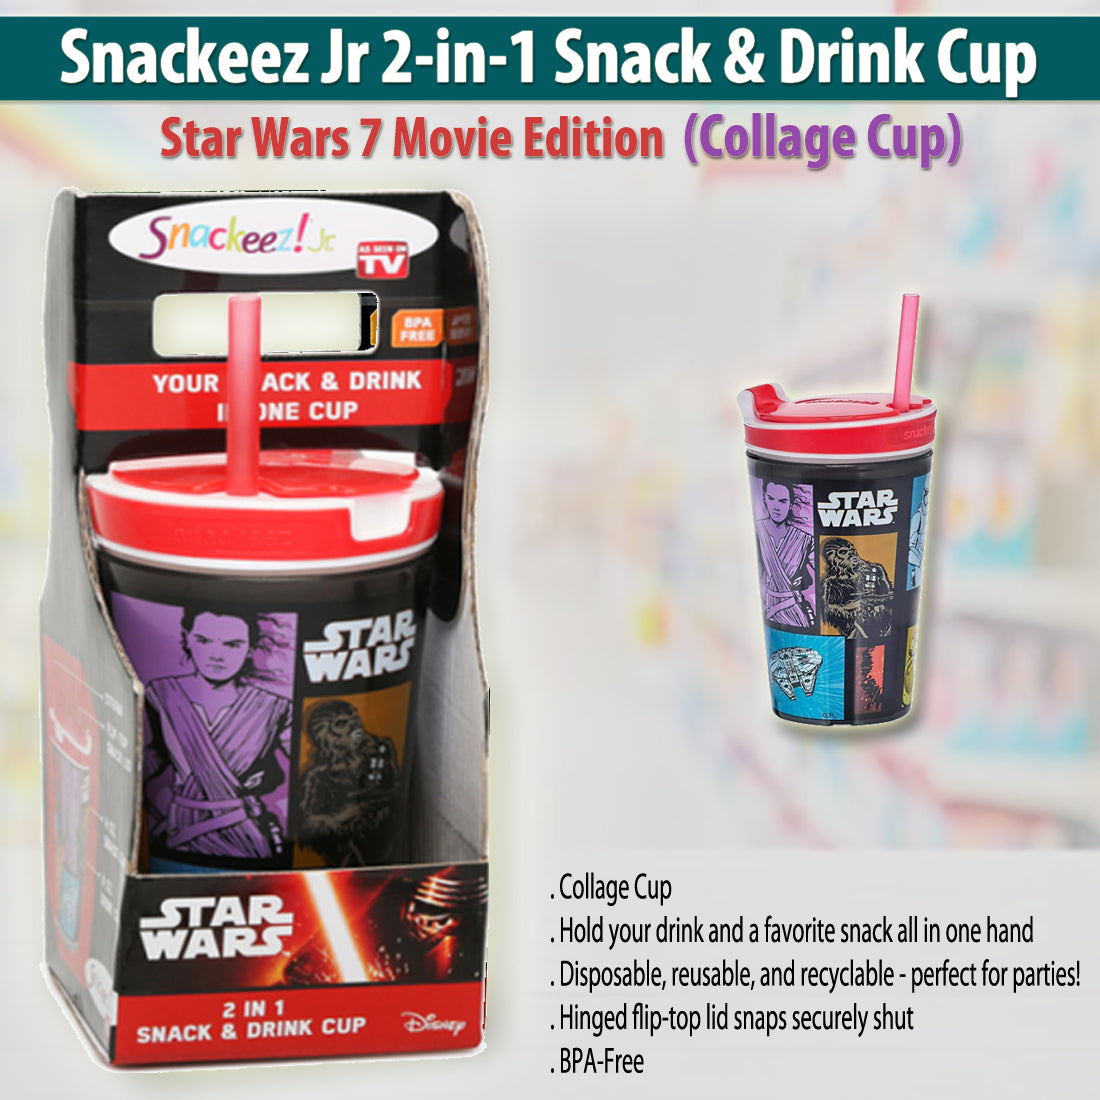 Snackeez Jr 2-in-1 Snack Drink Cup Star Wars (Collage Cup)